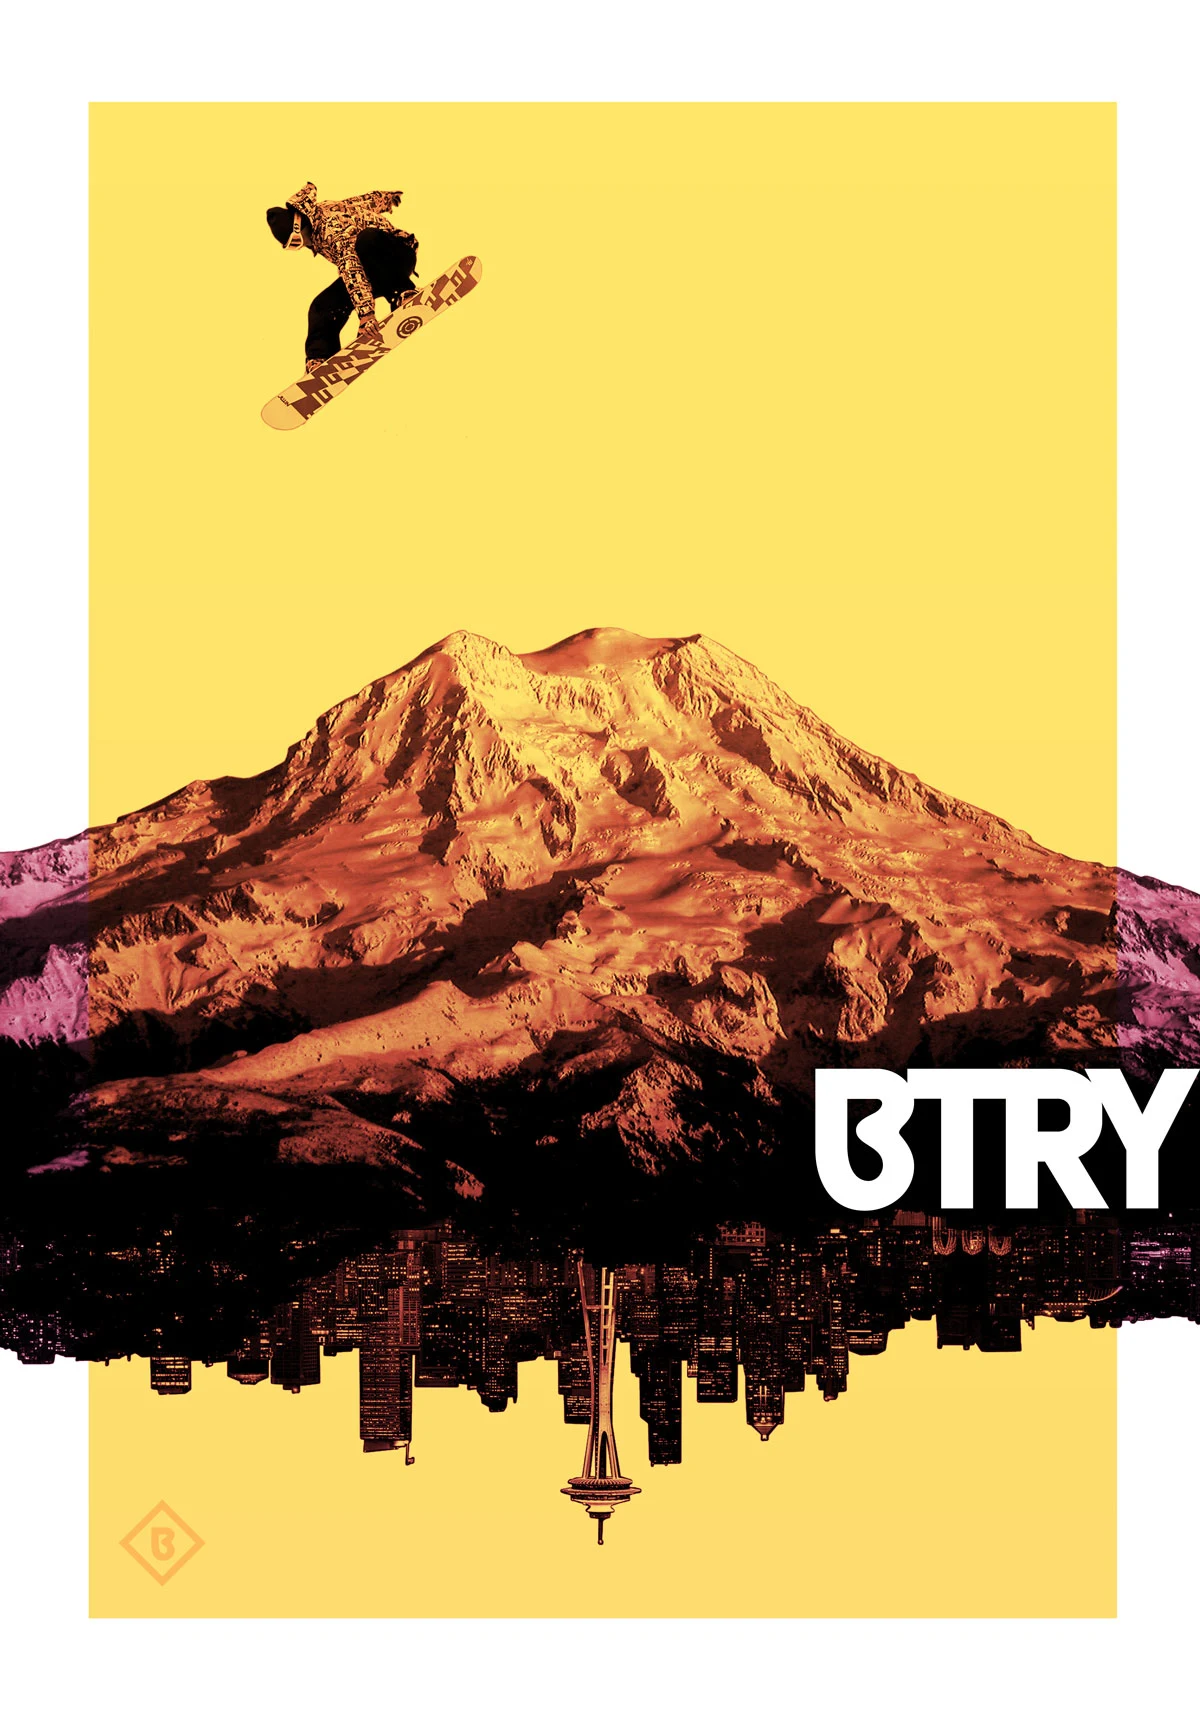 BTRY snowboard apparel poster